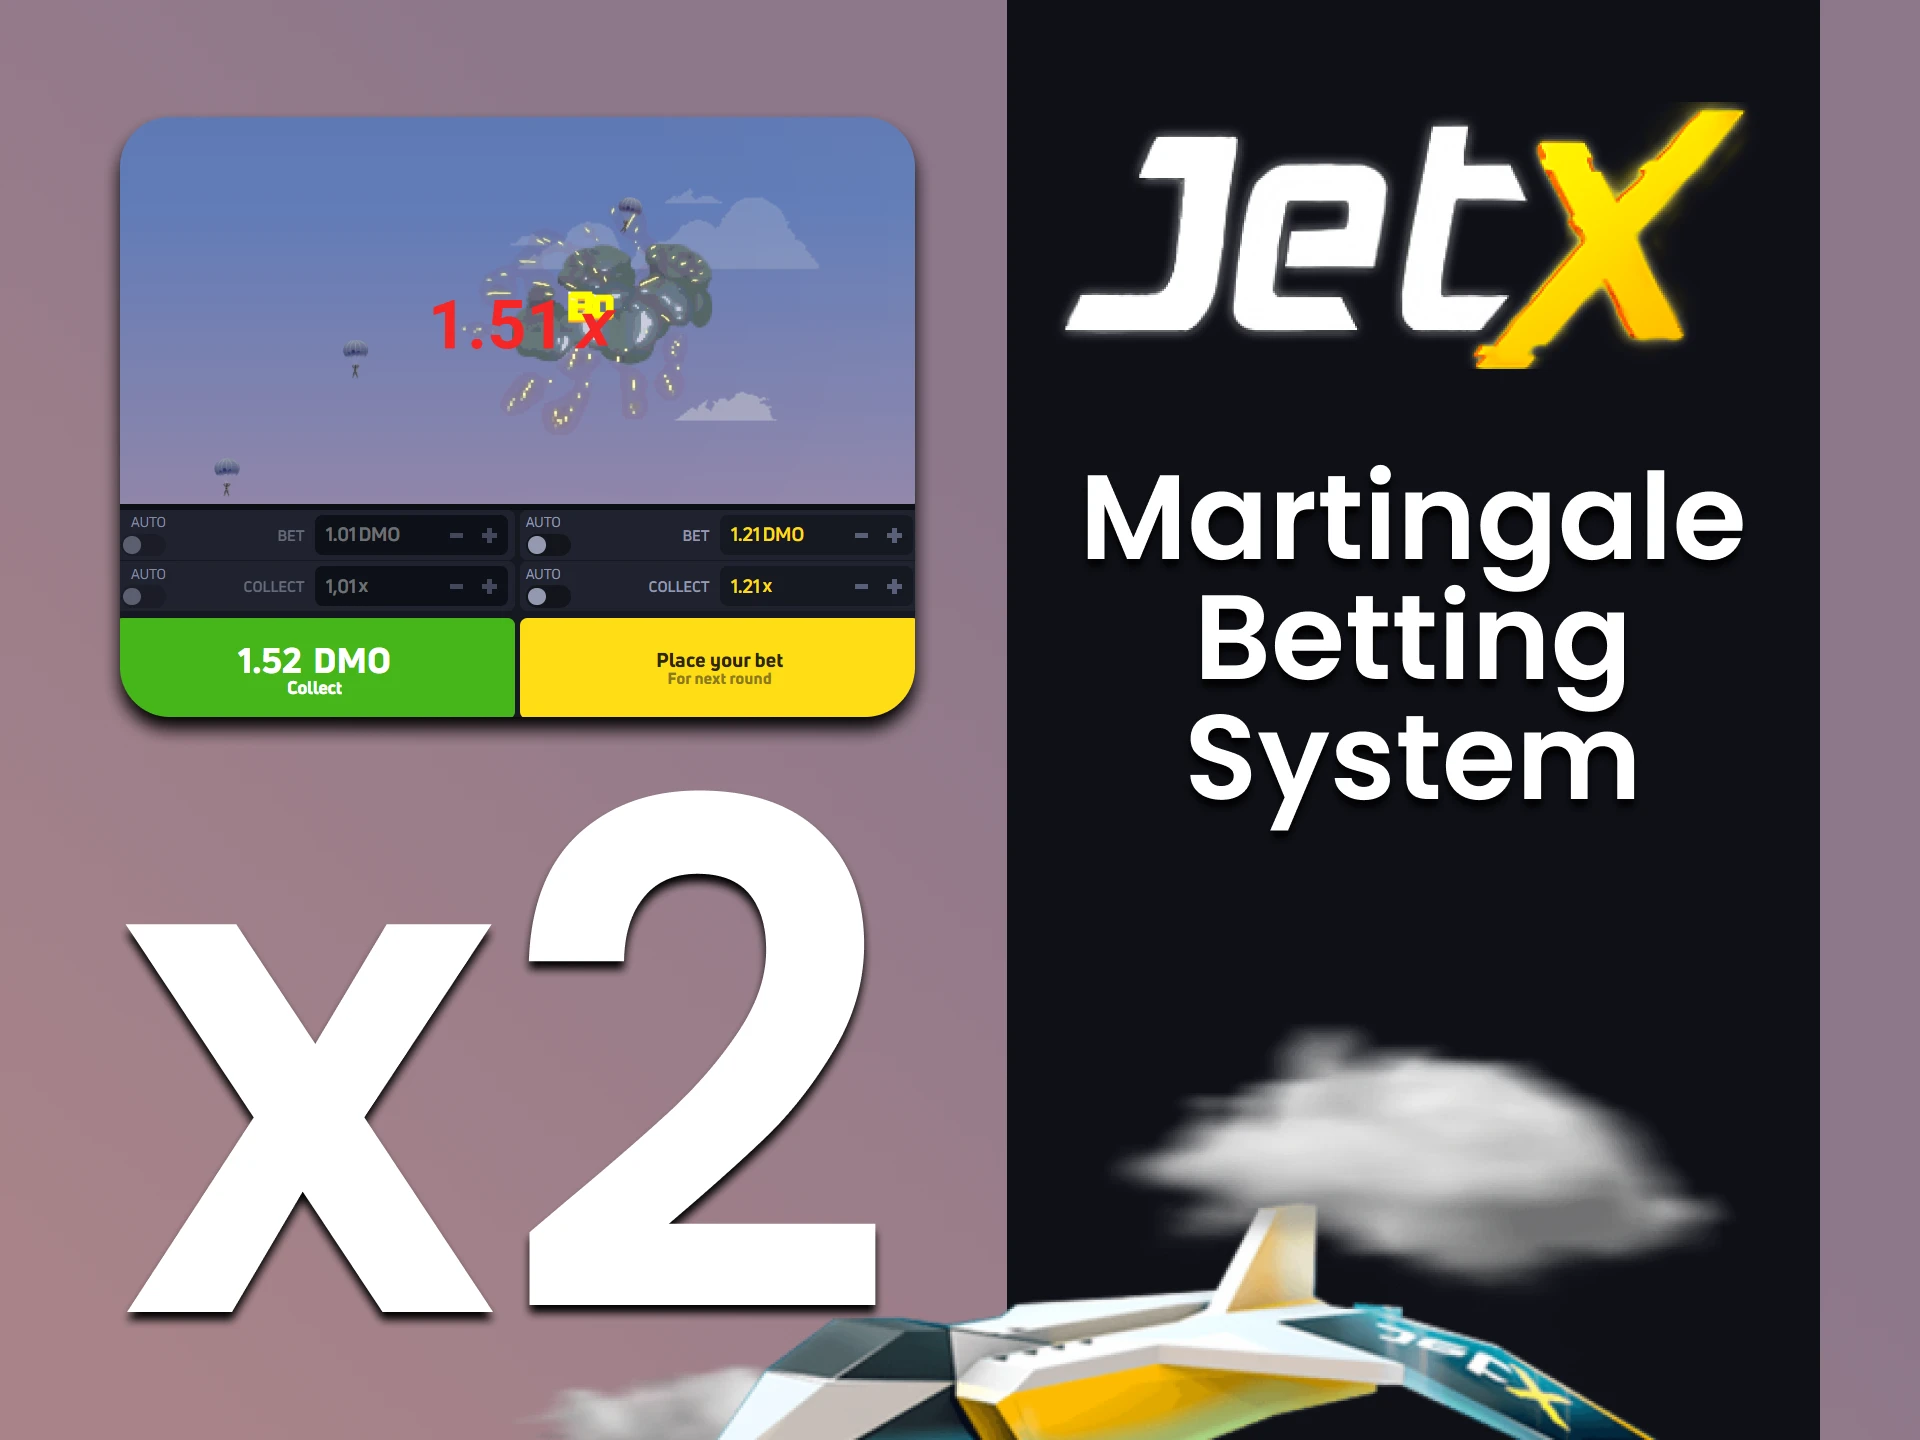 We will tell you about such a betting system for JetX as Martingale.